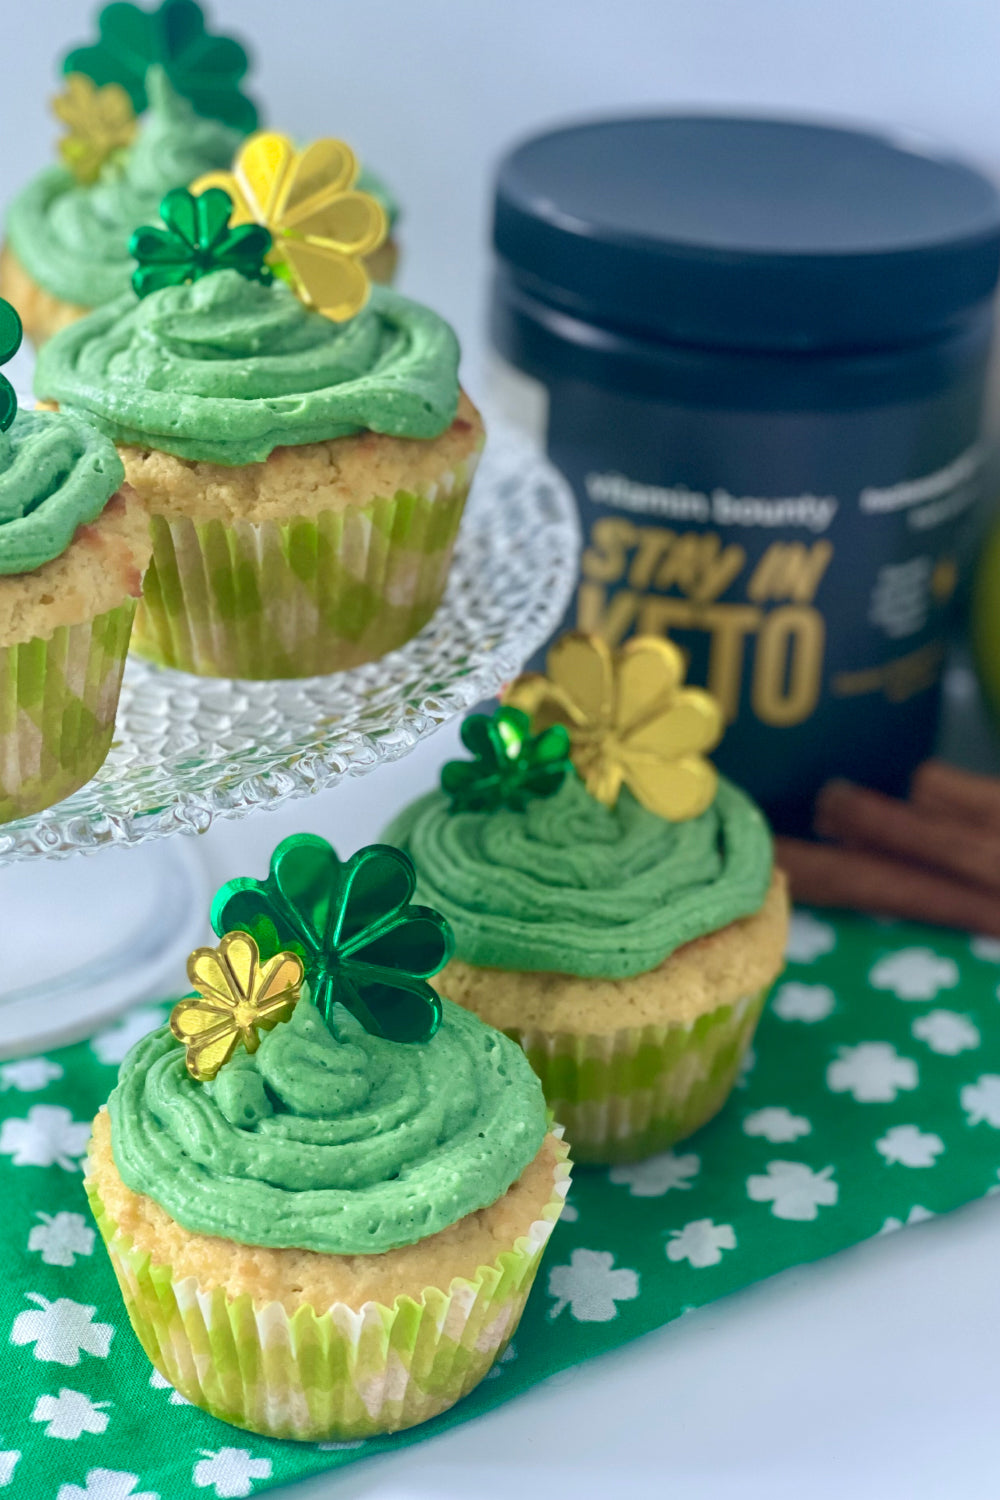 Cupcakes with Green Icing and shamrock charms on top, made with Stay in Keto by Vitamin Bounty